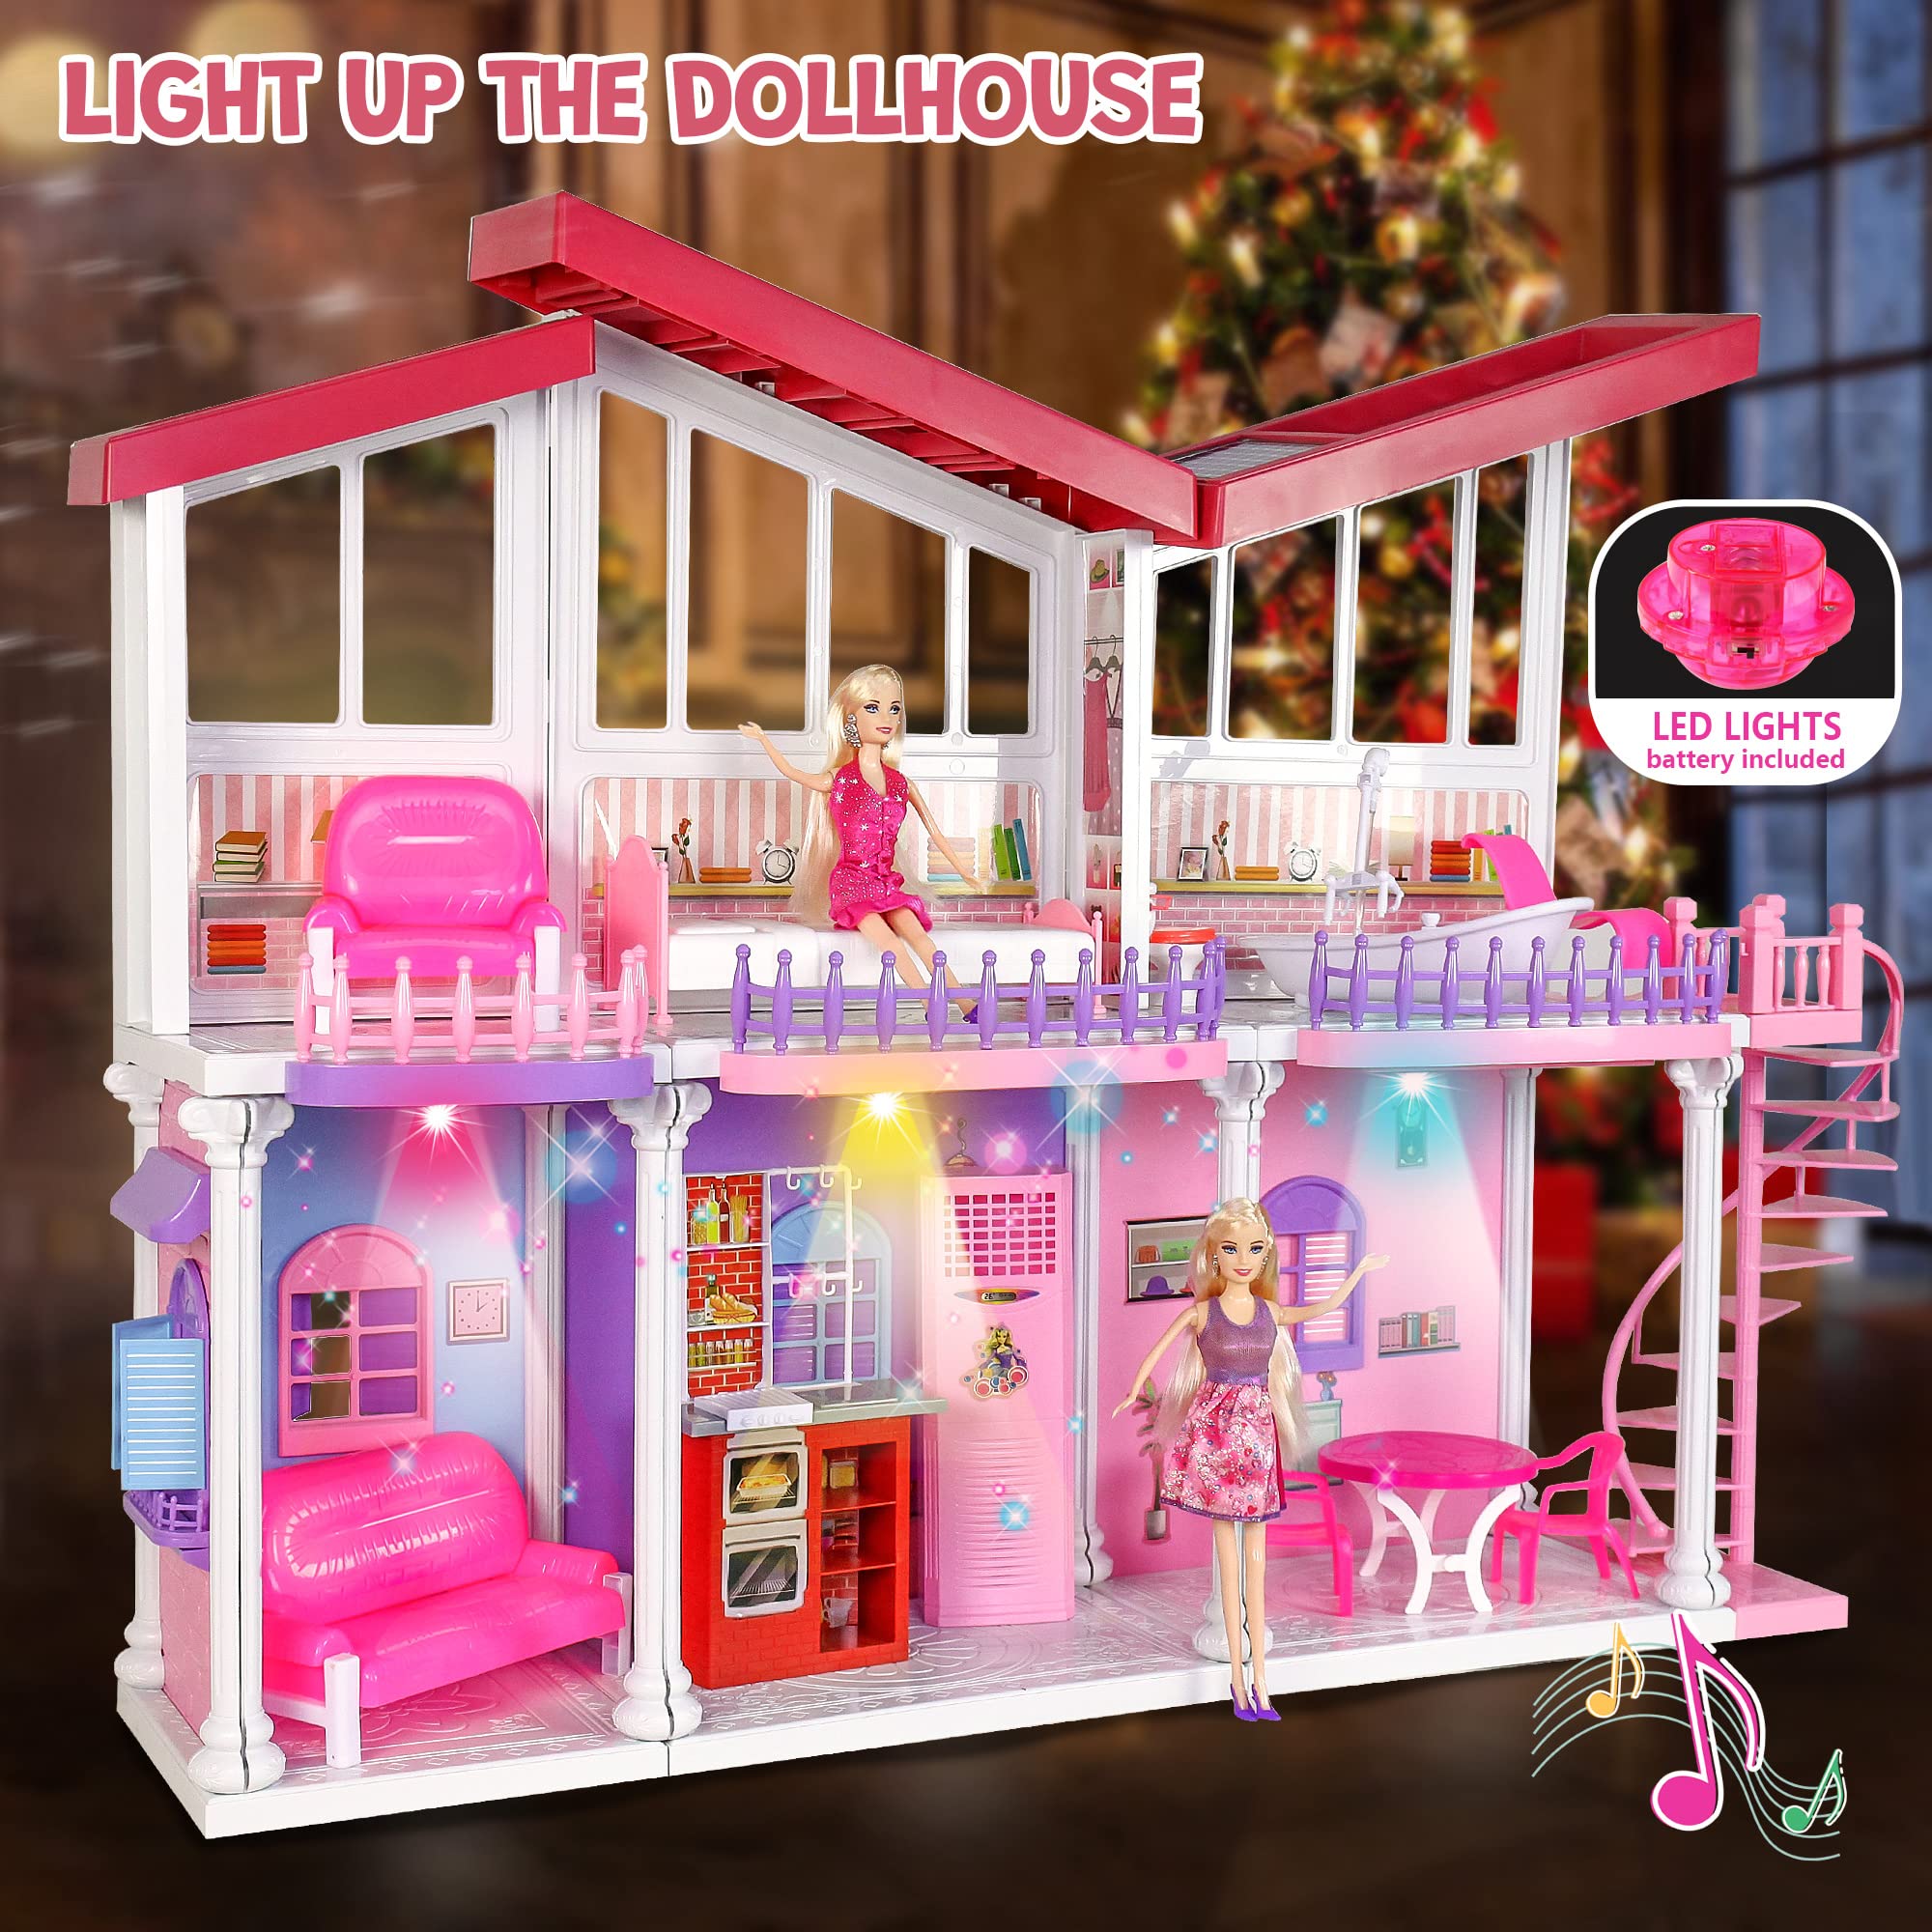 Bettina Big Doll House, Dream House 2022 w/ All Plastic Accessories, 2-Story Pink DIY Dollhouse w/ Stairs, Large Furniture, 11.5 Inch Dolls, Dreamhouse Gift for 3 to 12 Year Olds, Doll House 7-8